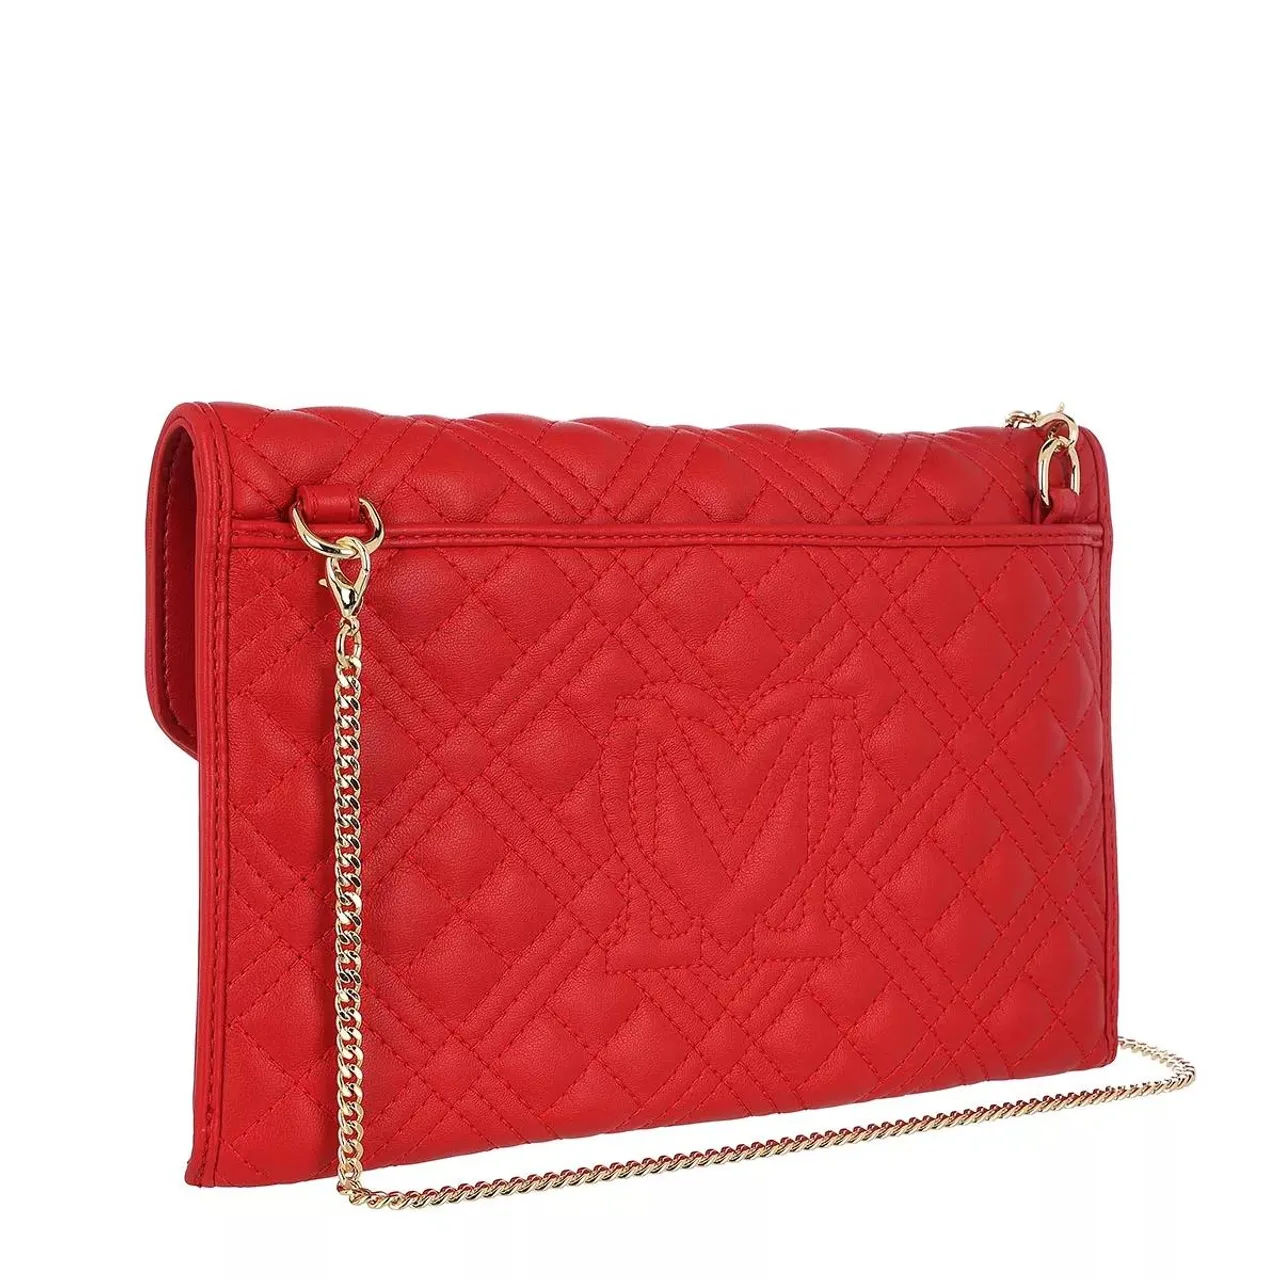 Love Moschino Satchels - Borsa Quilted Pu - red - Satchels for ladies